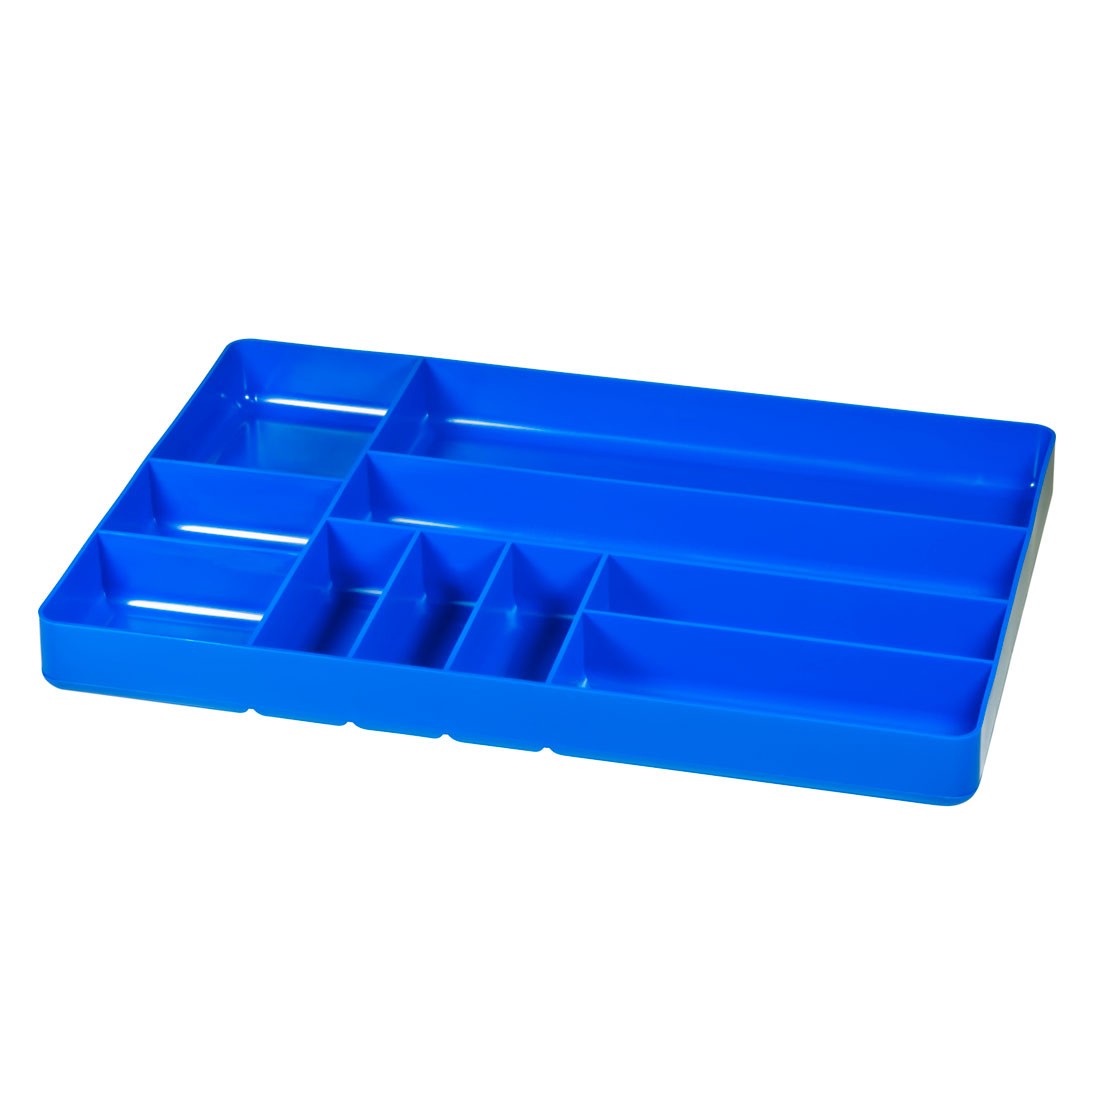 https://www.ernstrc.com/resize/shared/images/product/5012_ten-compartment-organizer-tray_blue-1100_1.jpg?bw=1000&w=1000&bh=1000&h=1000